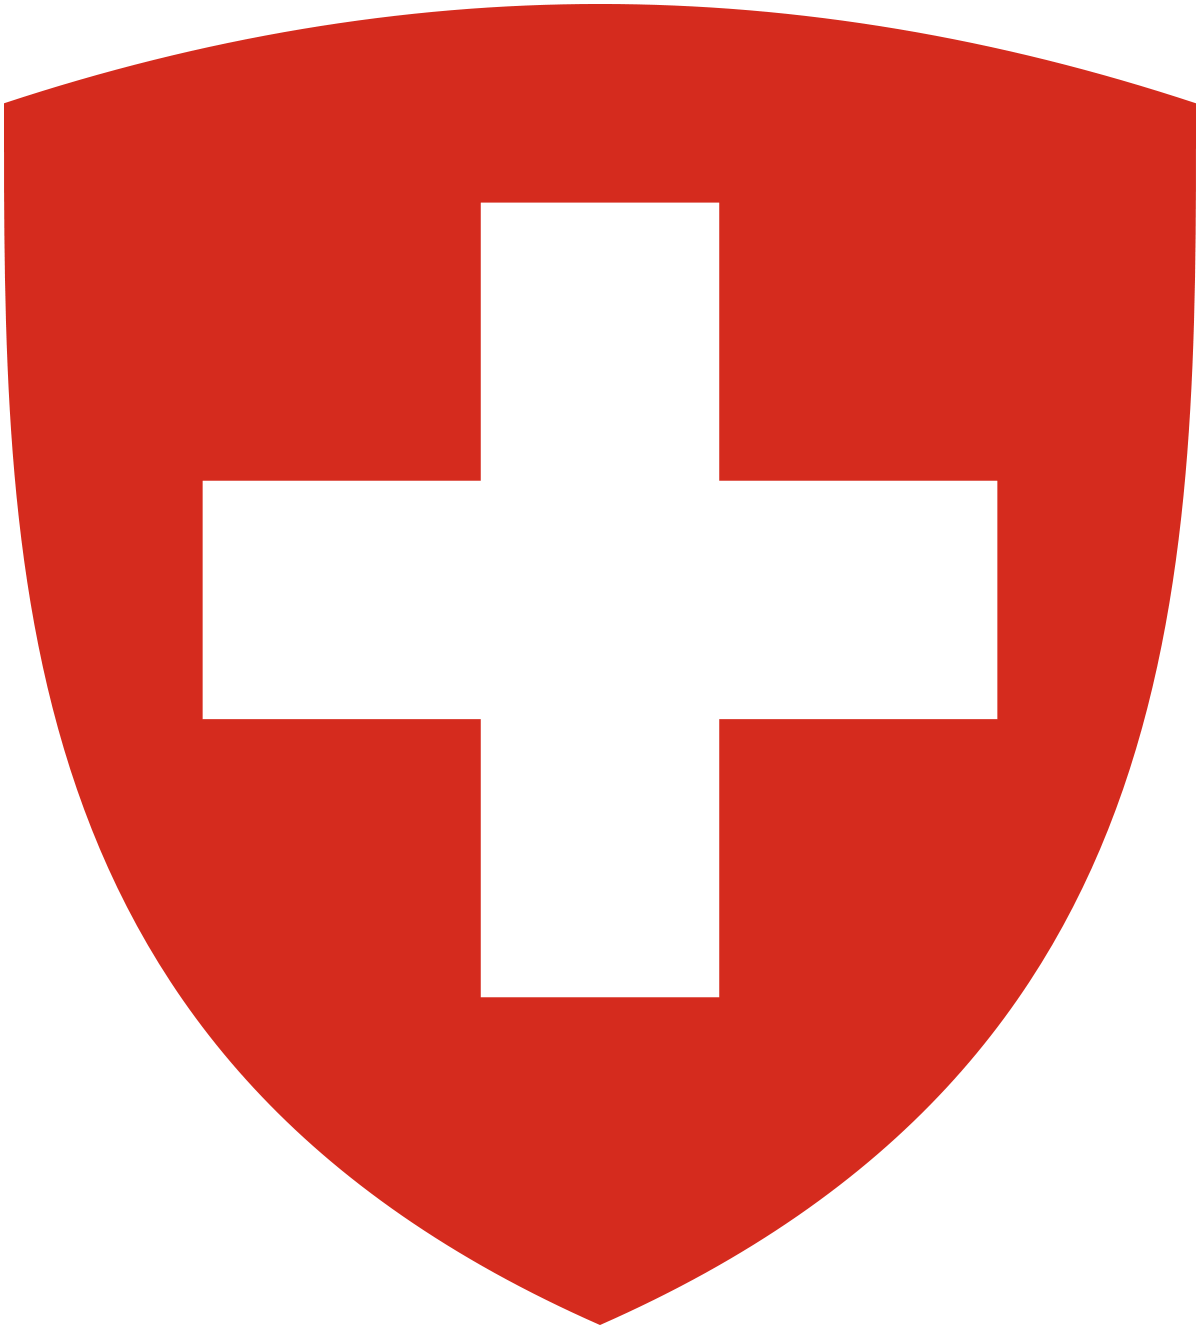 Red Shield in Automotive Industry Logo - Coat of arms of Switzerland